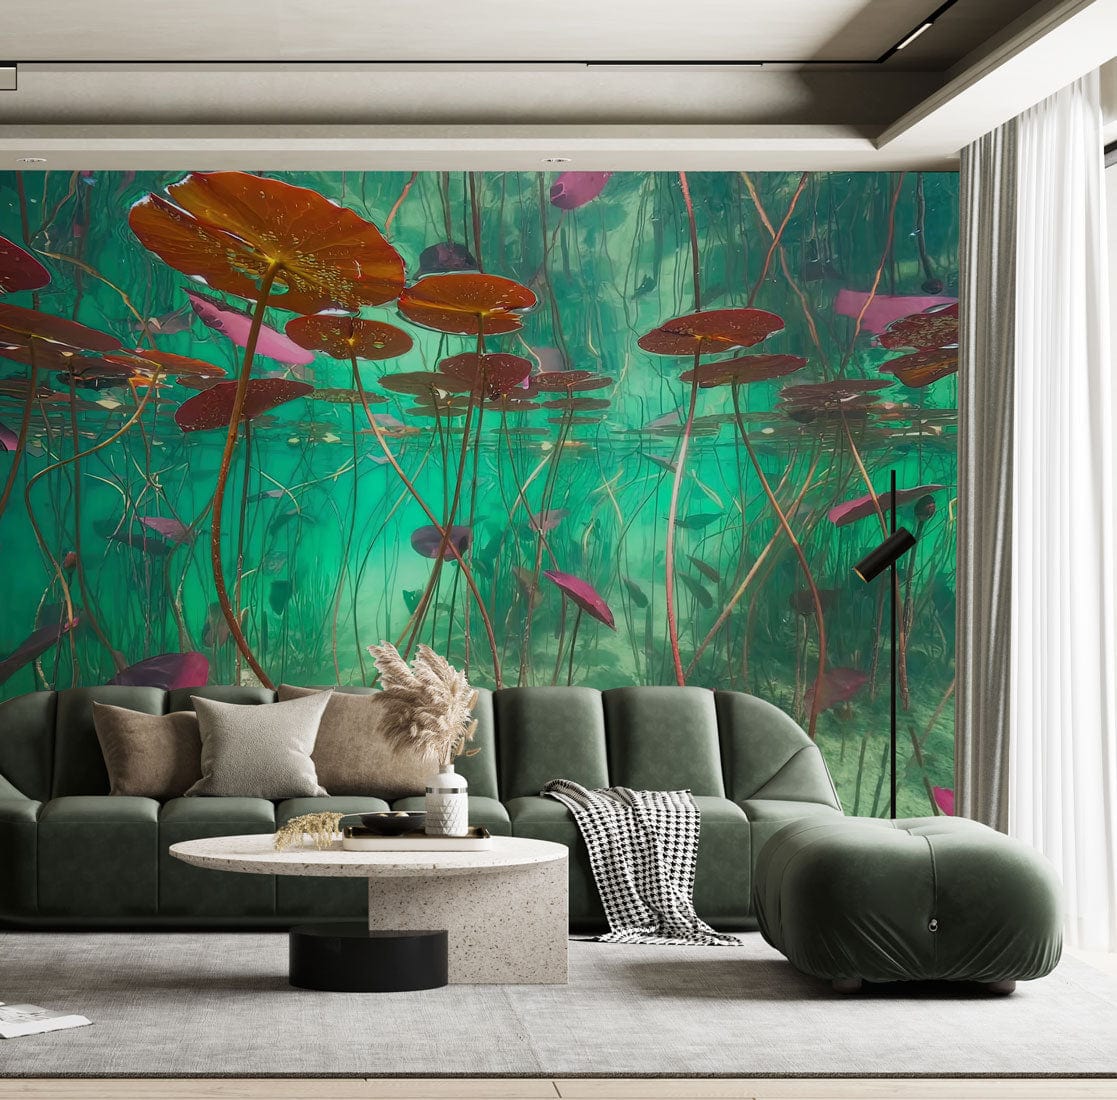 Decorate your living room with this beautiful Lily in Clean Water Wallpaper Mural.